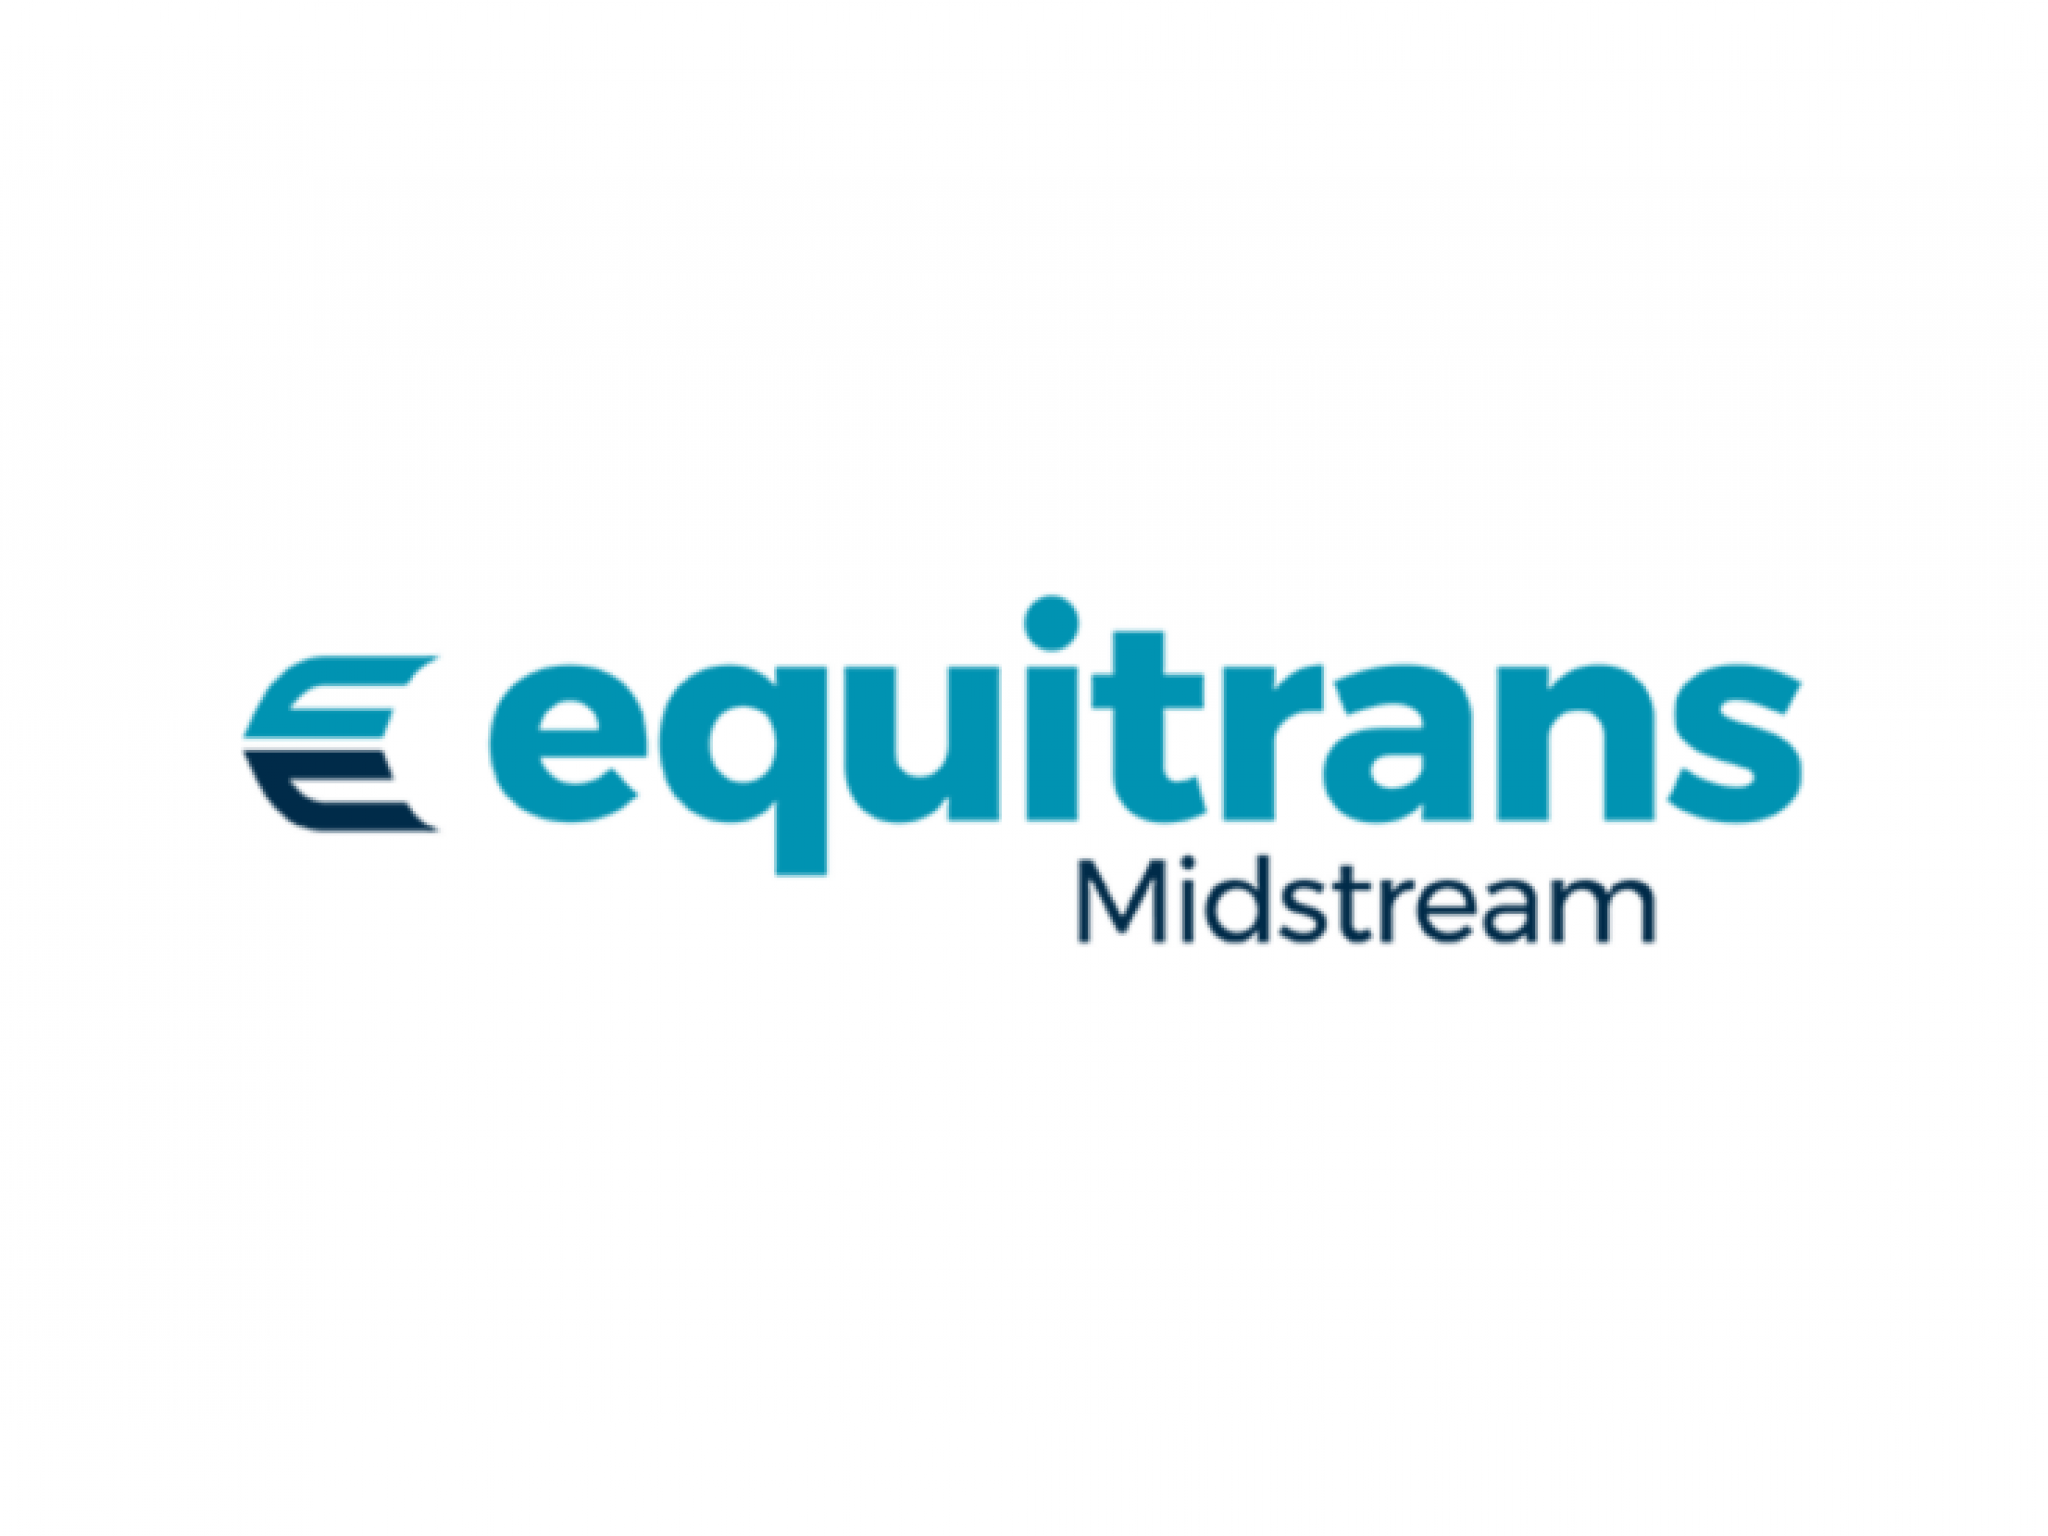  equitrans-midstream-in-strategic-transaction-talks---whats-on-the-cards 